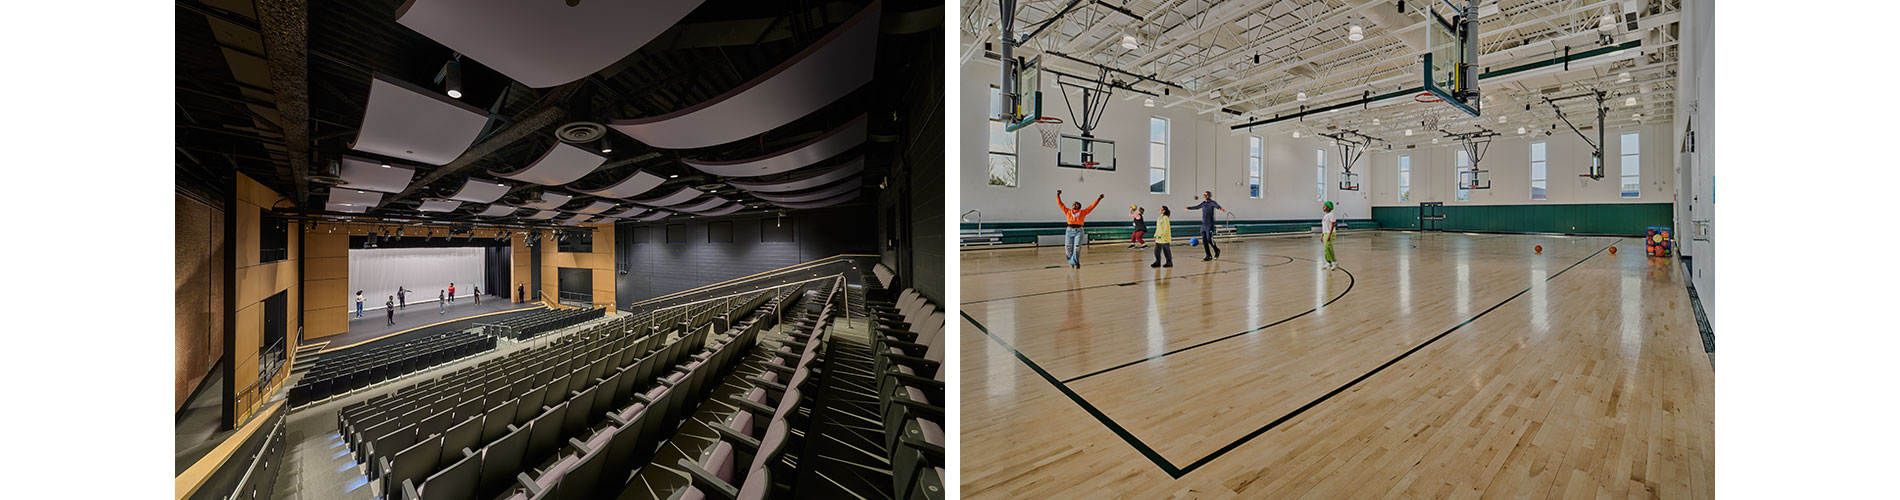 Winooski Schools - new Performing Arts Center and Gym